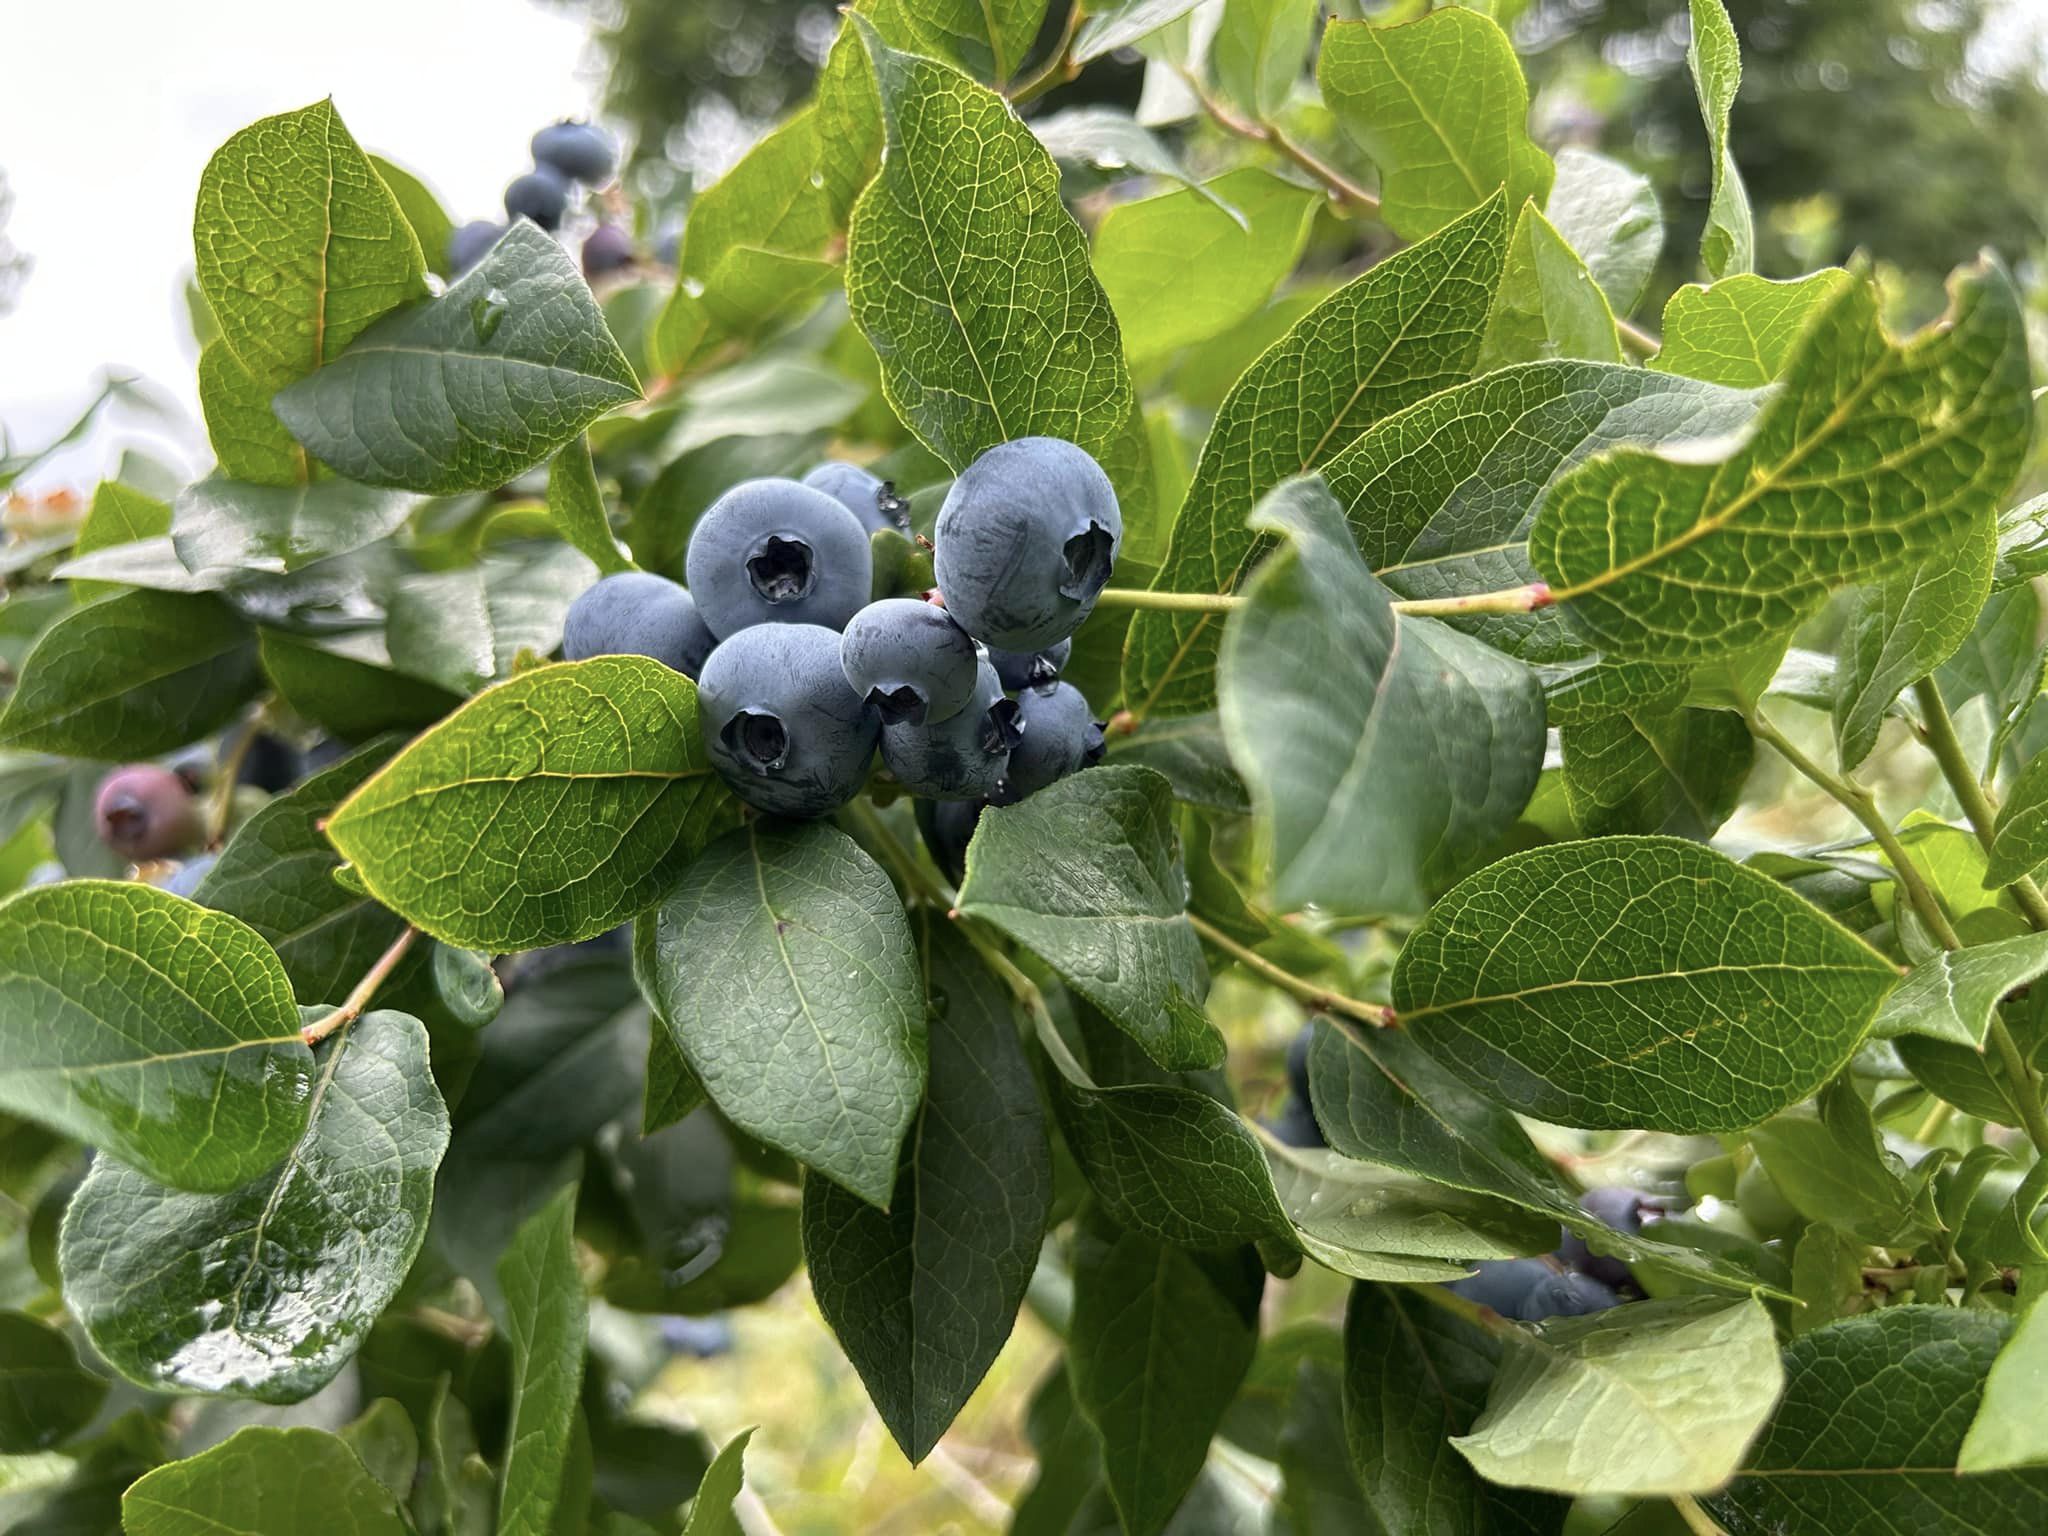 Ripe Blueberries on the bush ready to pick at Wilson's Organic Blueberries in Tweed, Ontario